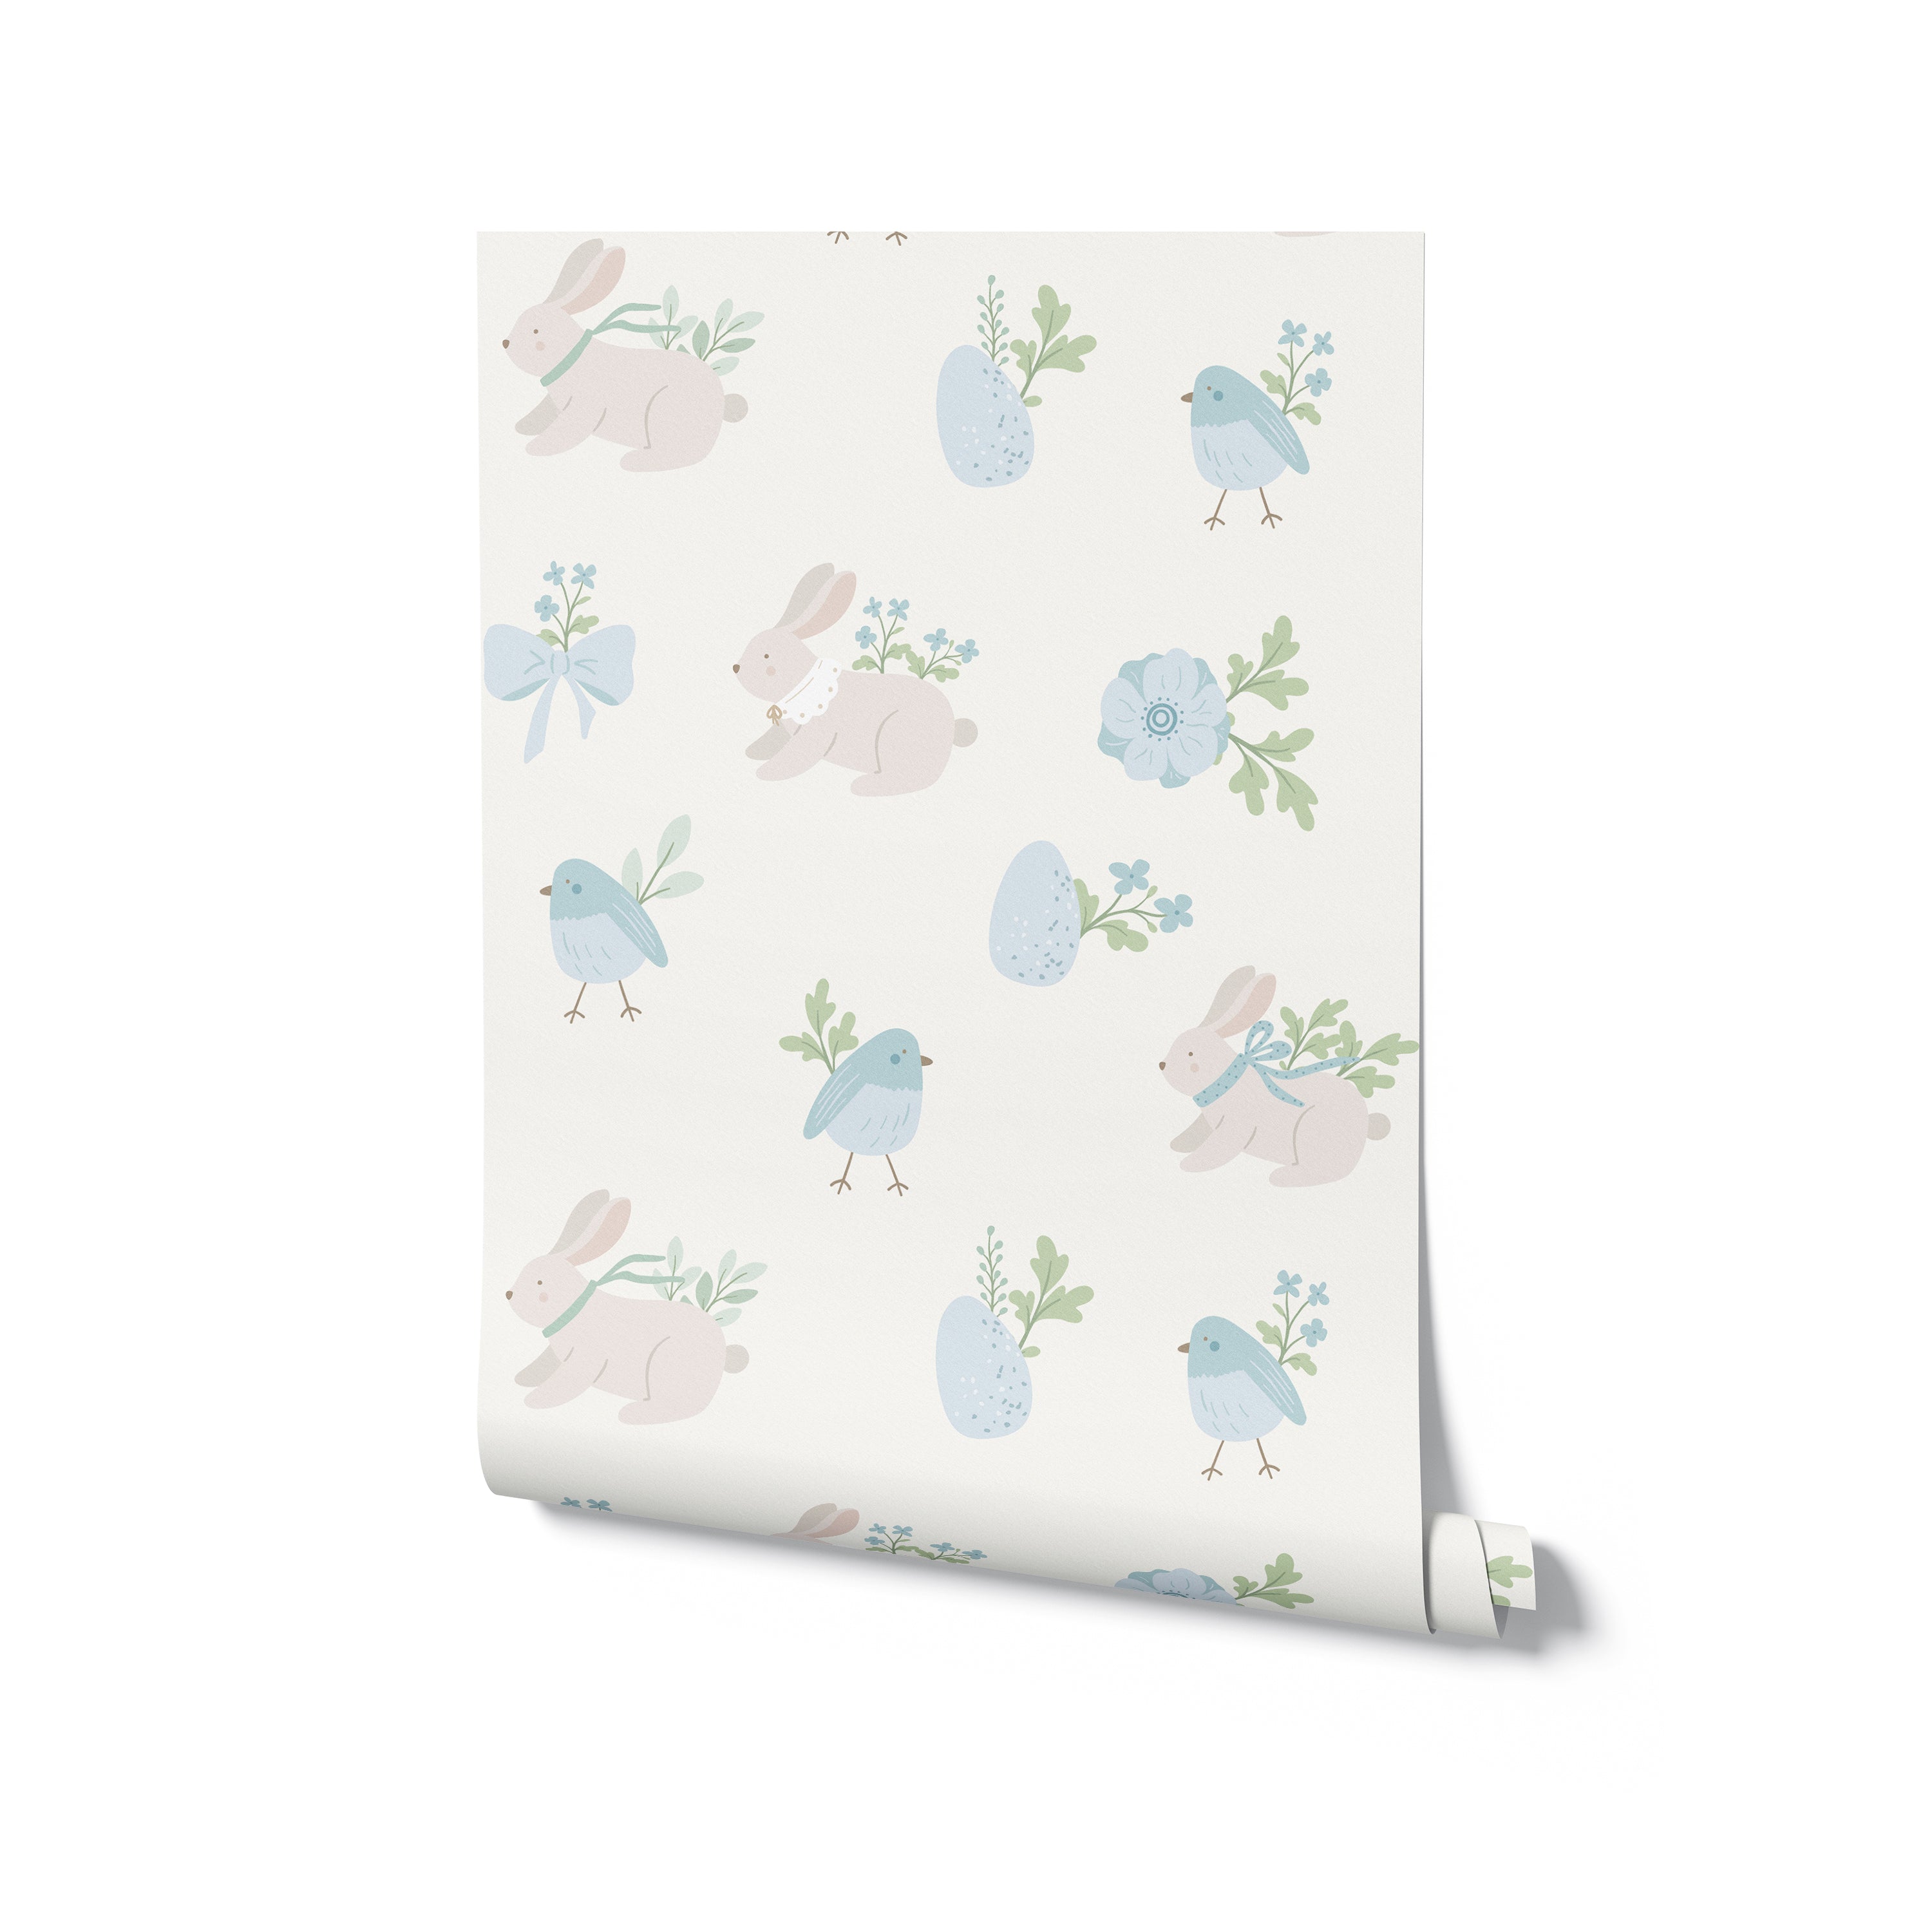 A roll of Bunny and Bird Wallpaper displaying a charming pattern of light-colored bunnies, blue birds, and floral elements on a white background, perfect for adding a whimsical and serene touch to nursery or playroom interiors